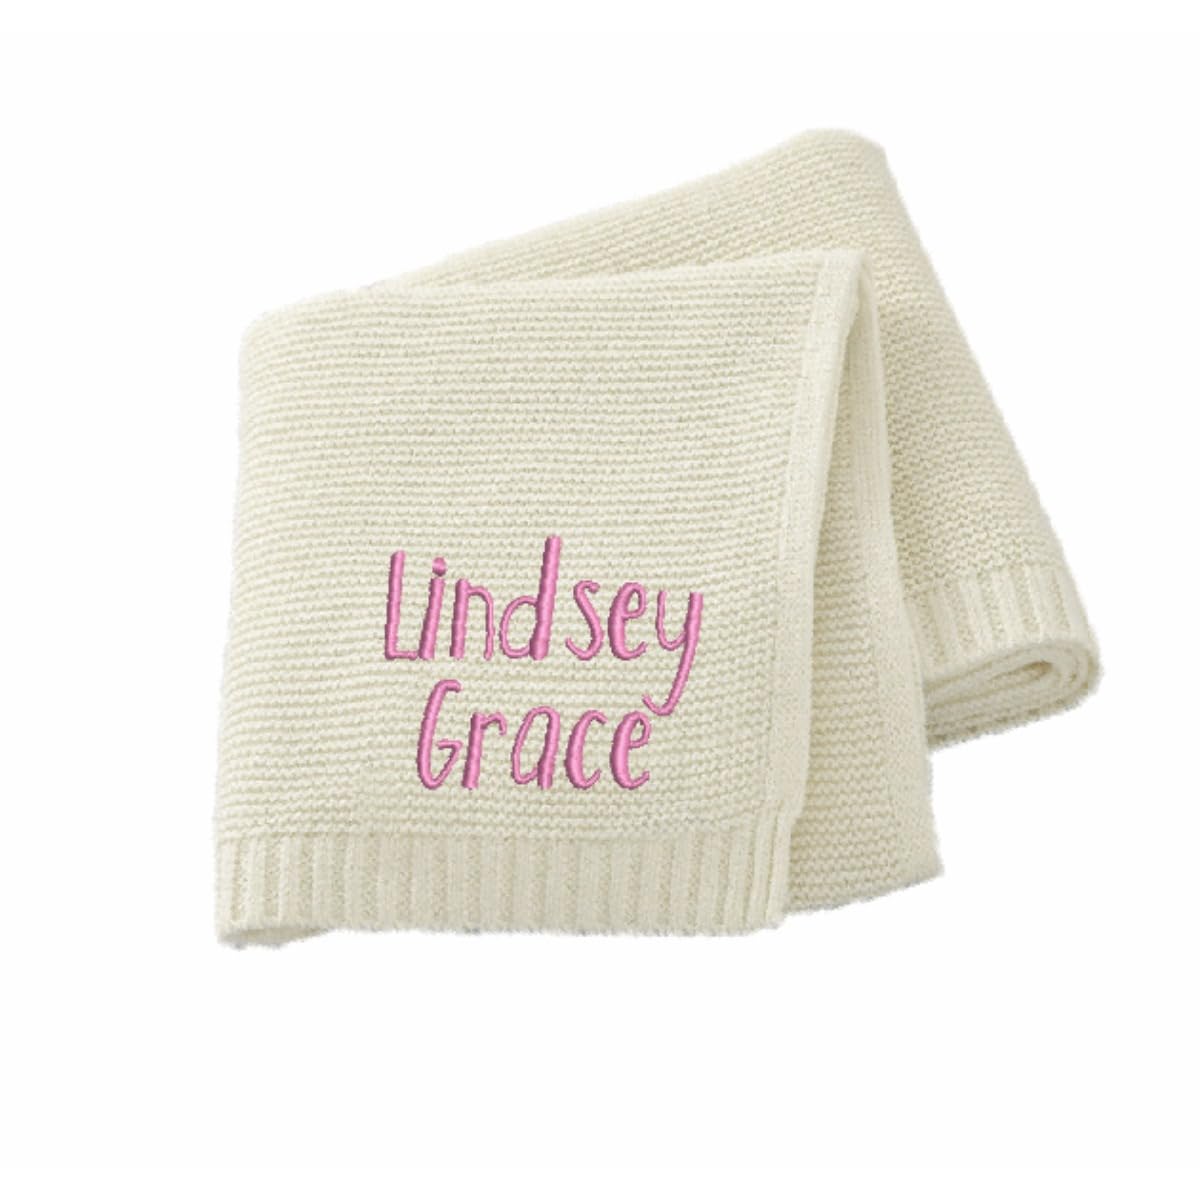 Personalized Knit Baby Name Blanket | Embroidery Gift for Baby Shower | Stroller Blanket | Monogrammed Newborn Baby Gift | Soft Cotton Knit (Embroidered Name)